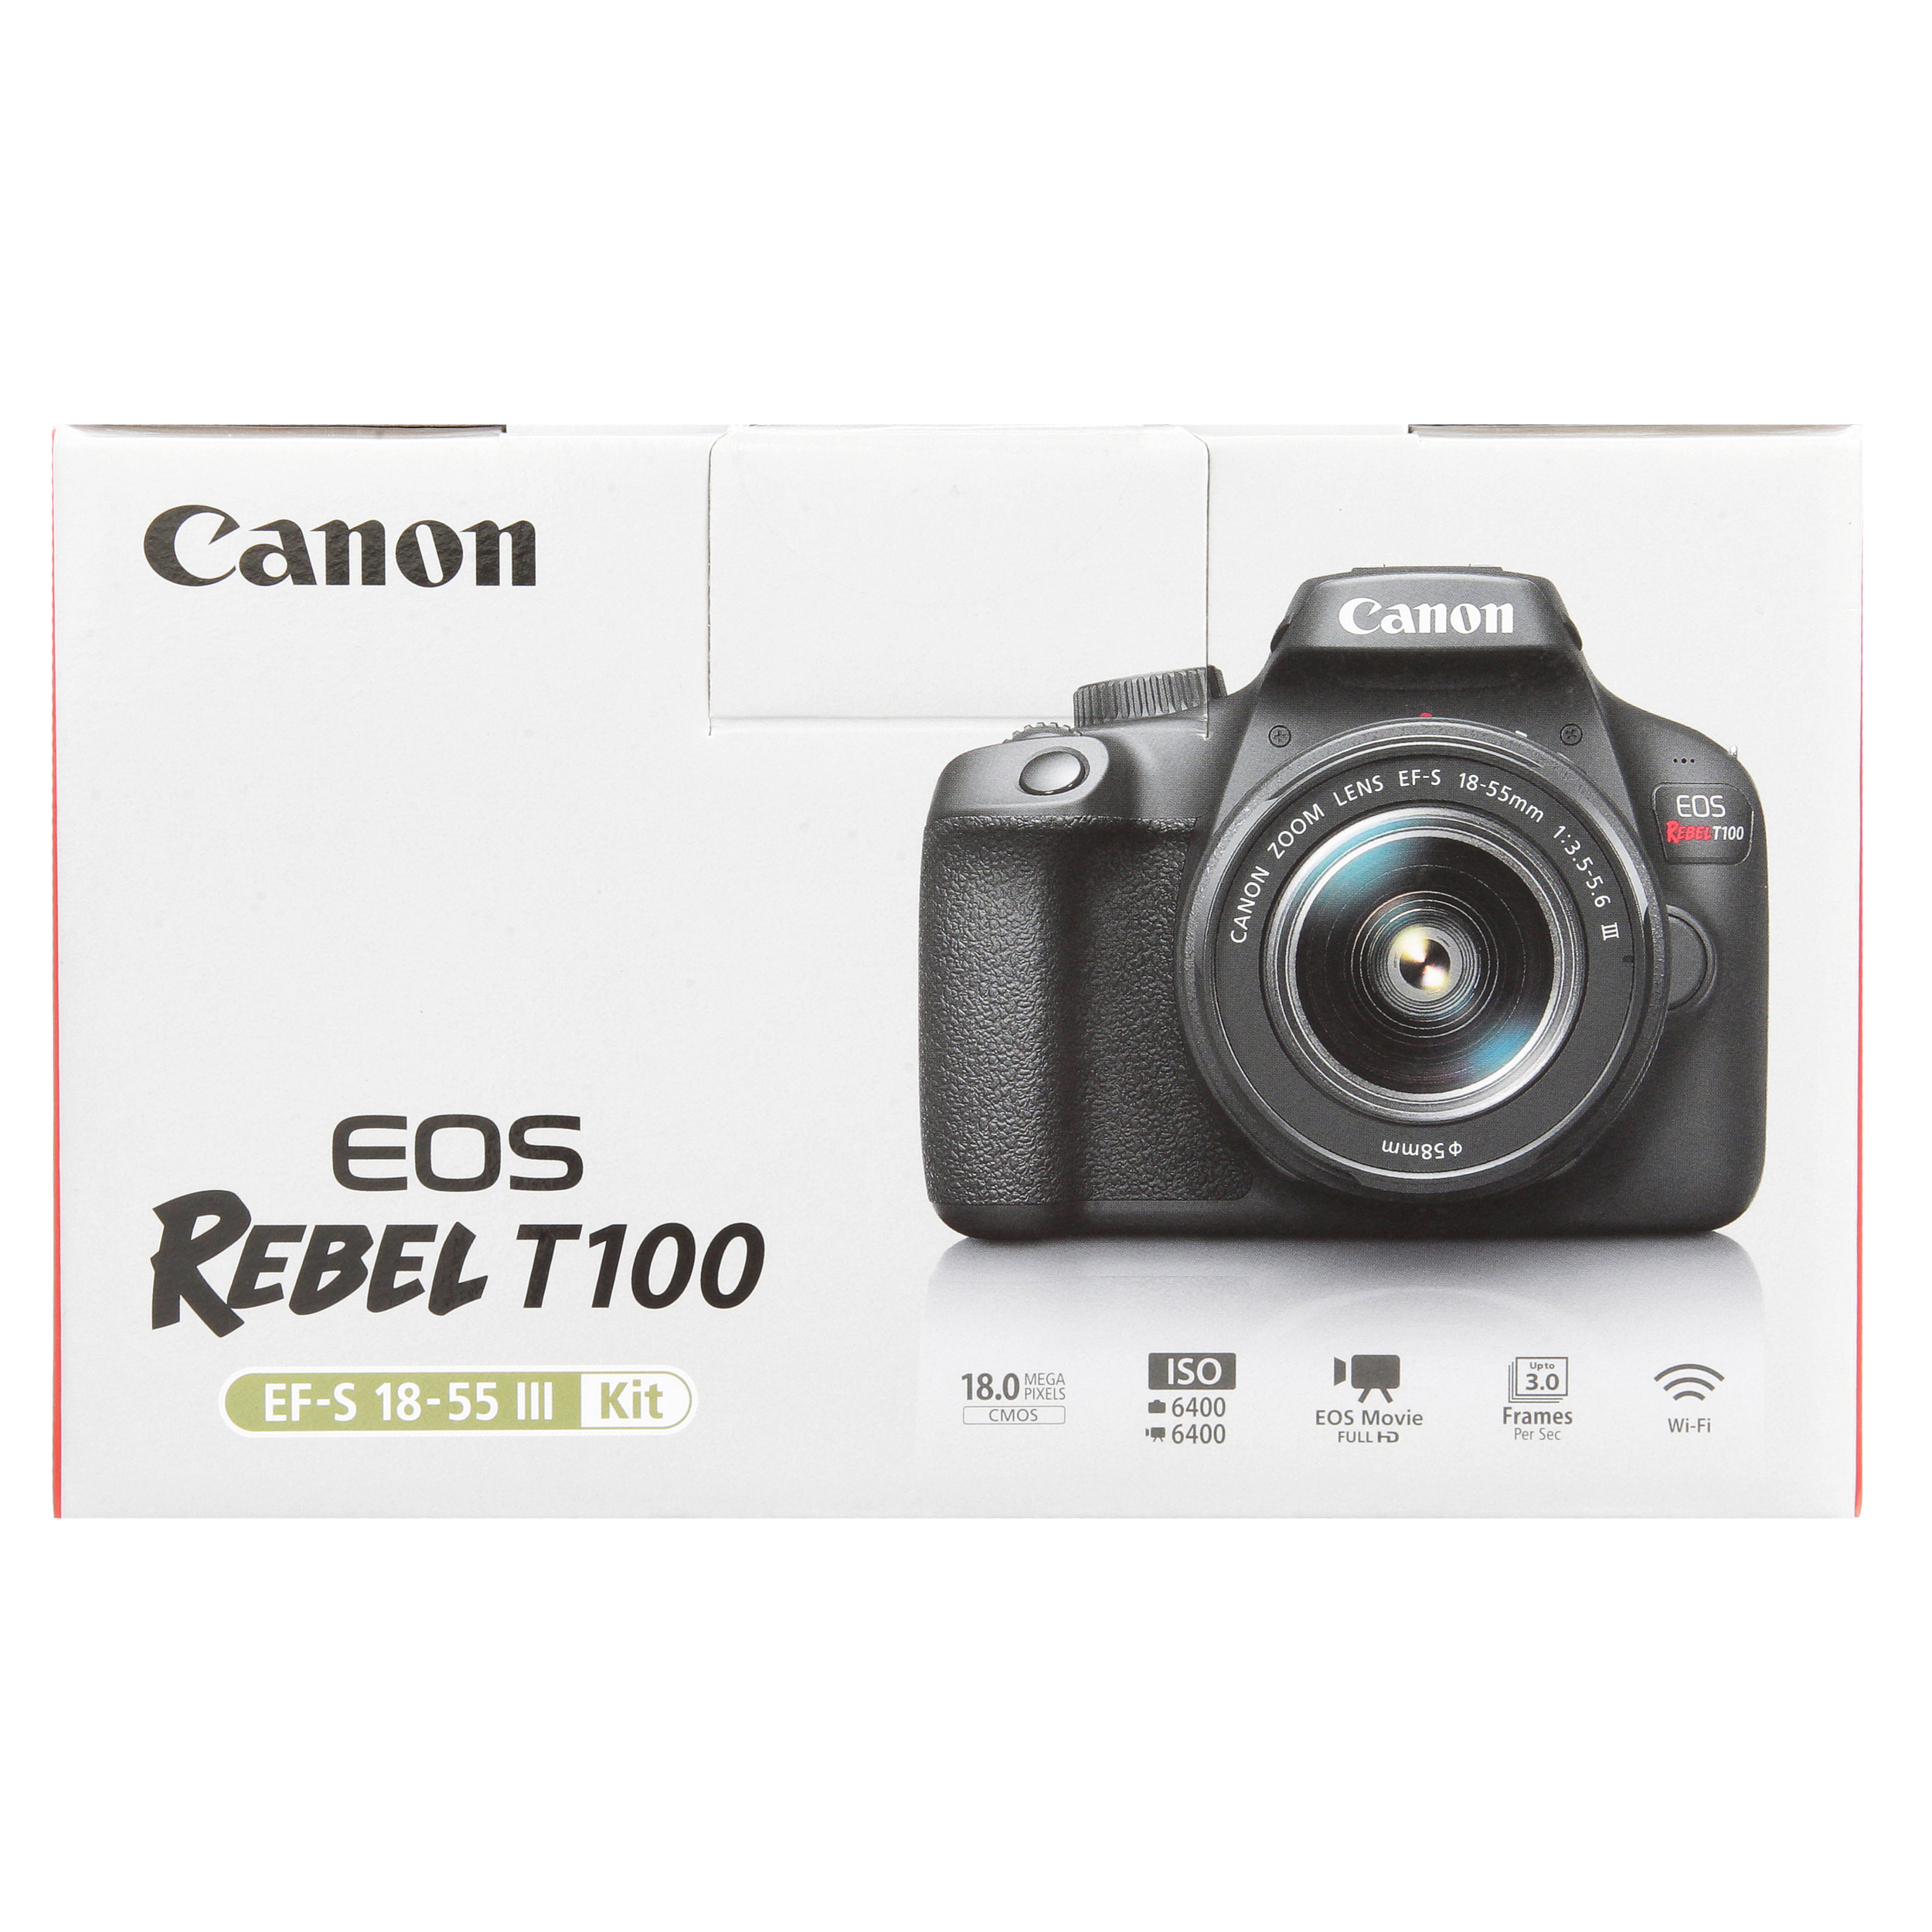 Canon EOS Rebel T100 Digital SLR Camera with 18-55mm Lens Kit + 16GB Card +Deal-expo Essential Bundle - image 4 of 4